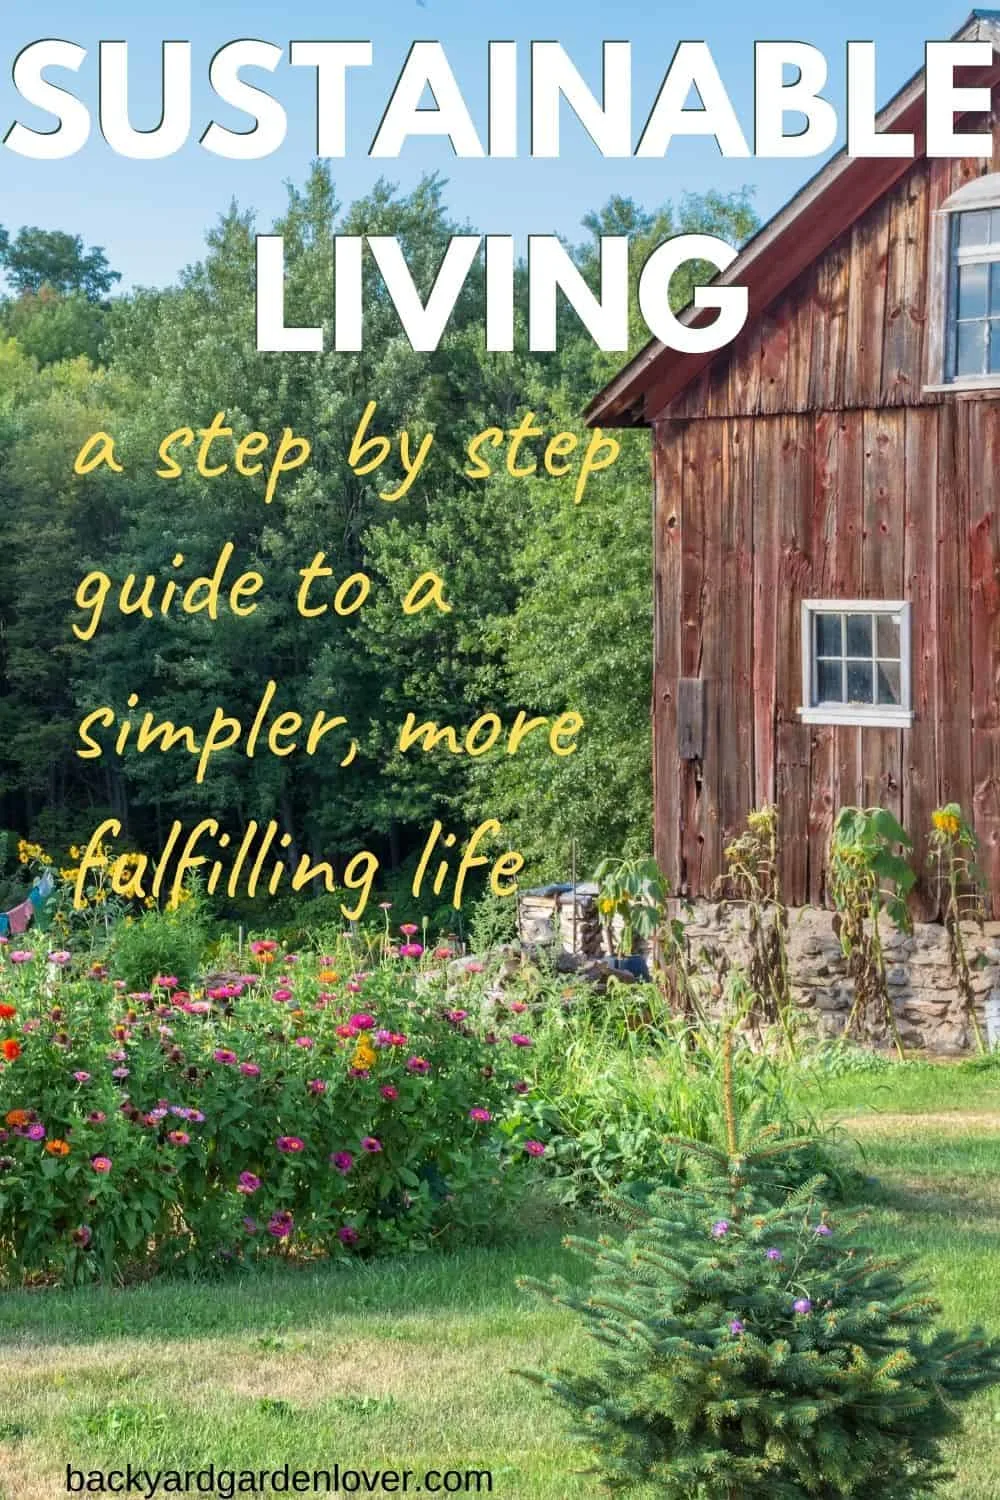 Sustainable living - a step by step guide to a simpler, more fulfilling life - Pinterest image